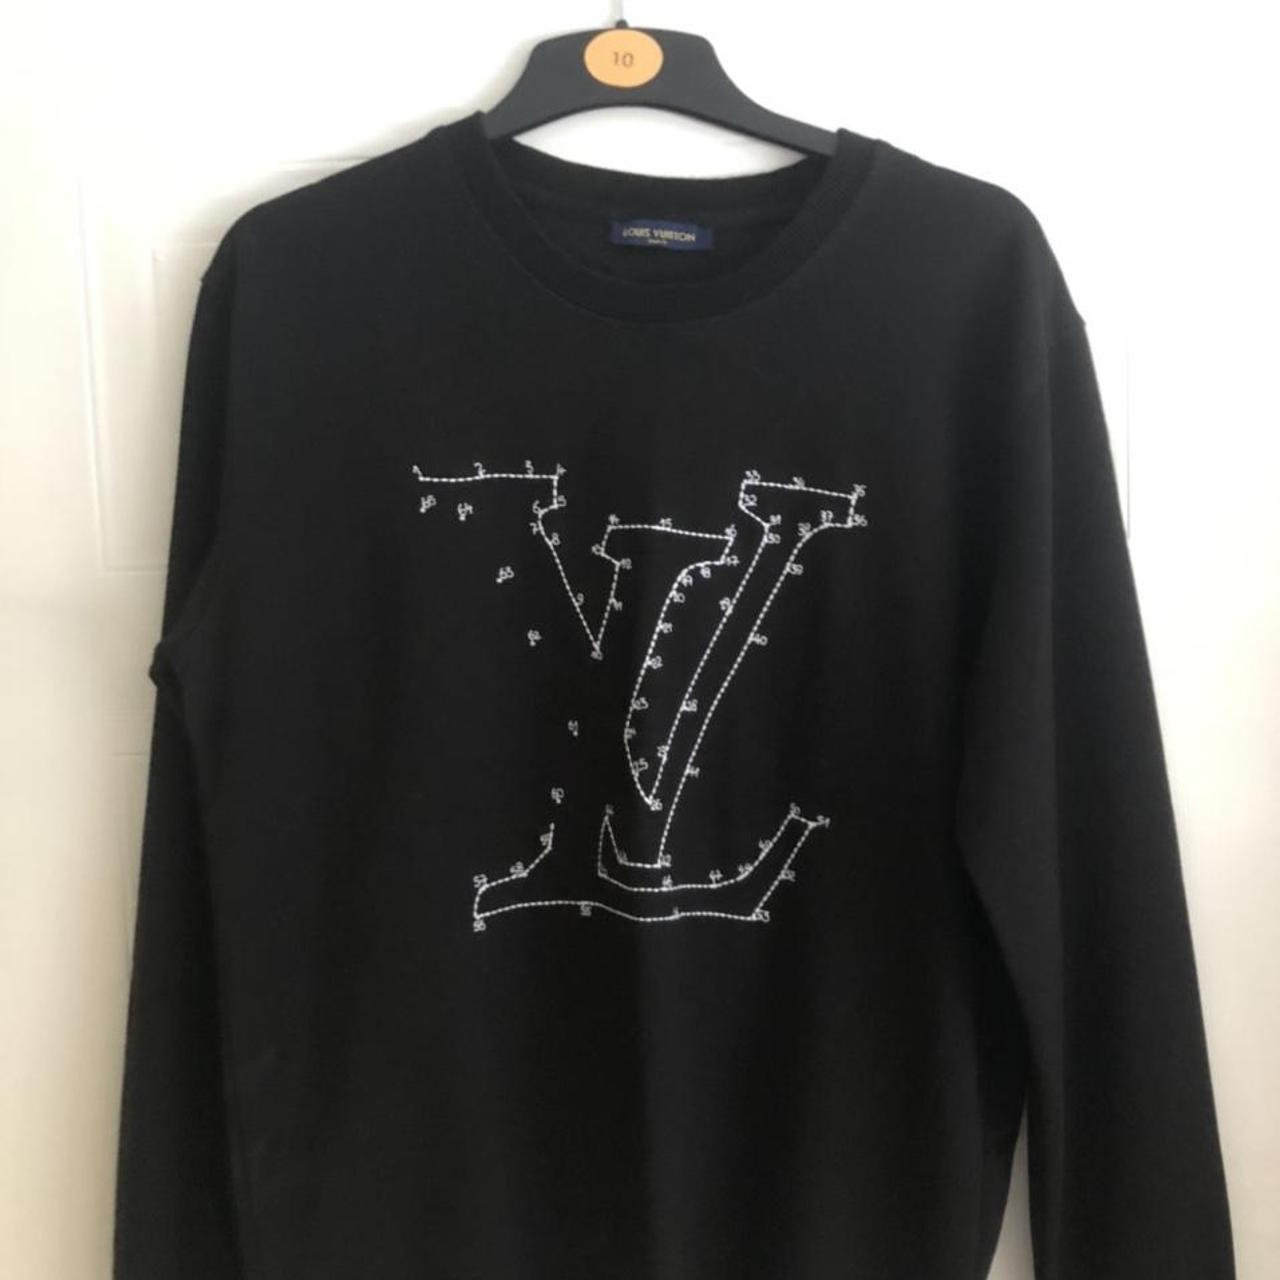 LV stitch and embroidered long sleeved t-shirt.... - Depop